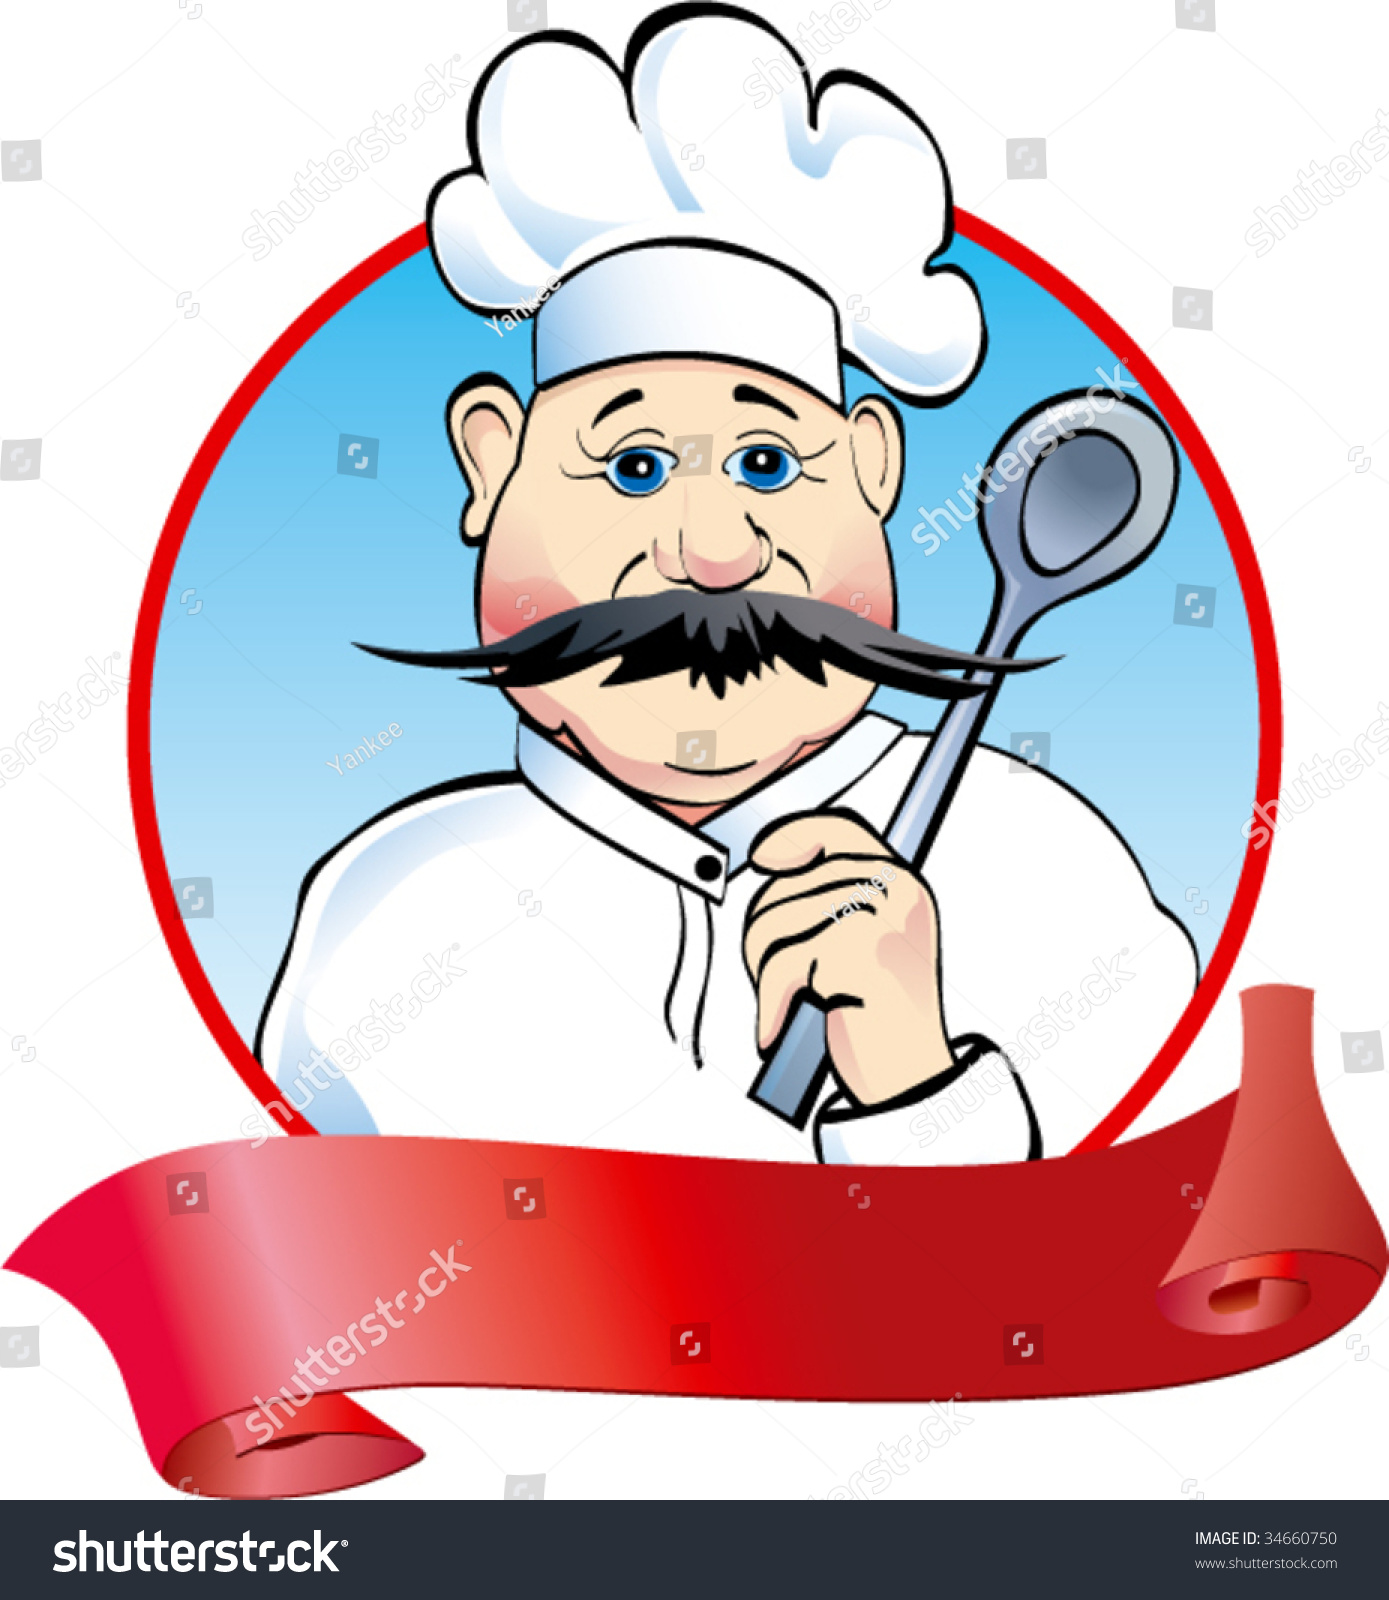 Cook With Spoon And Ribbon Stock Vector Illustration 34660750 ...